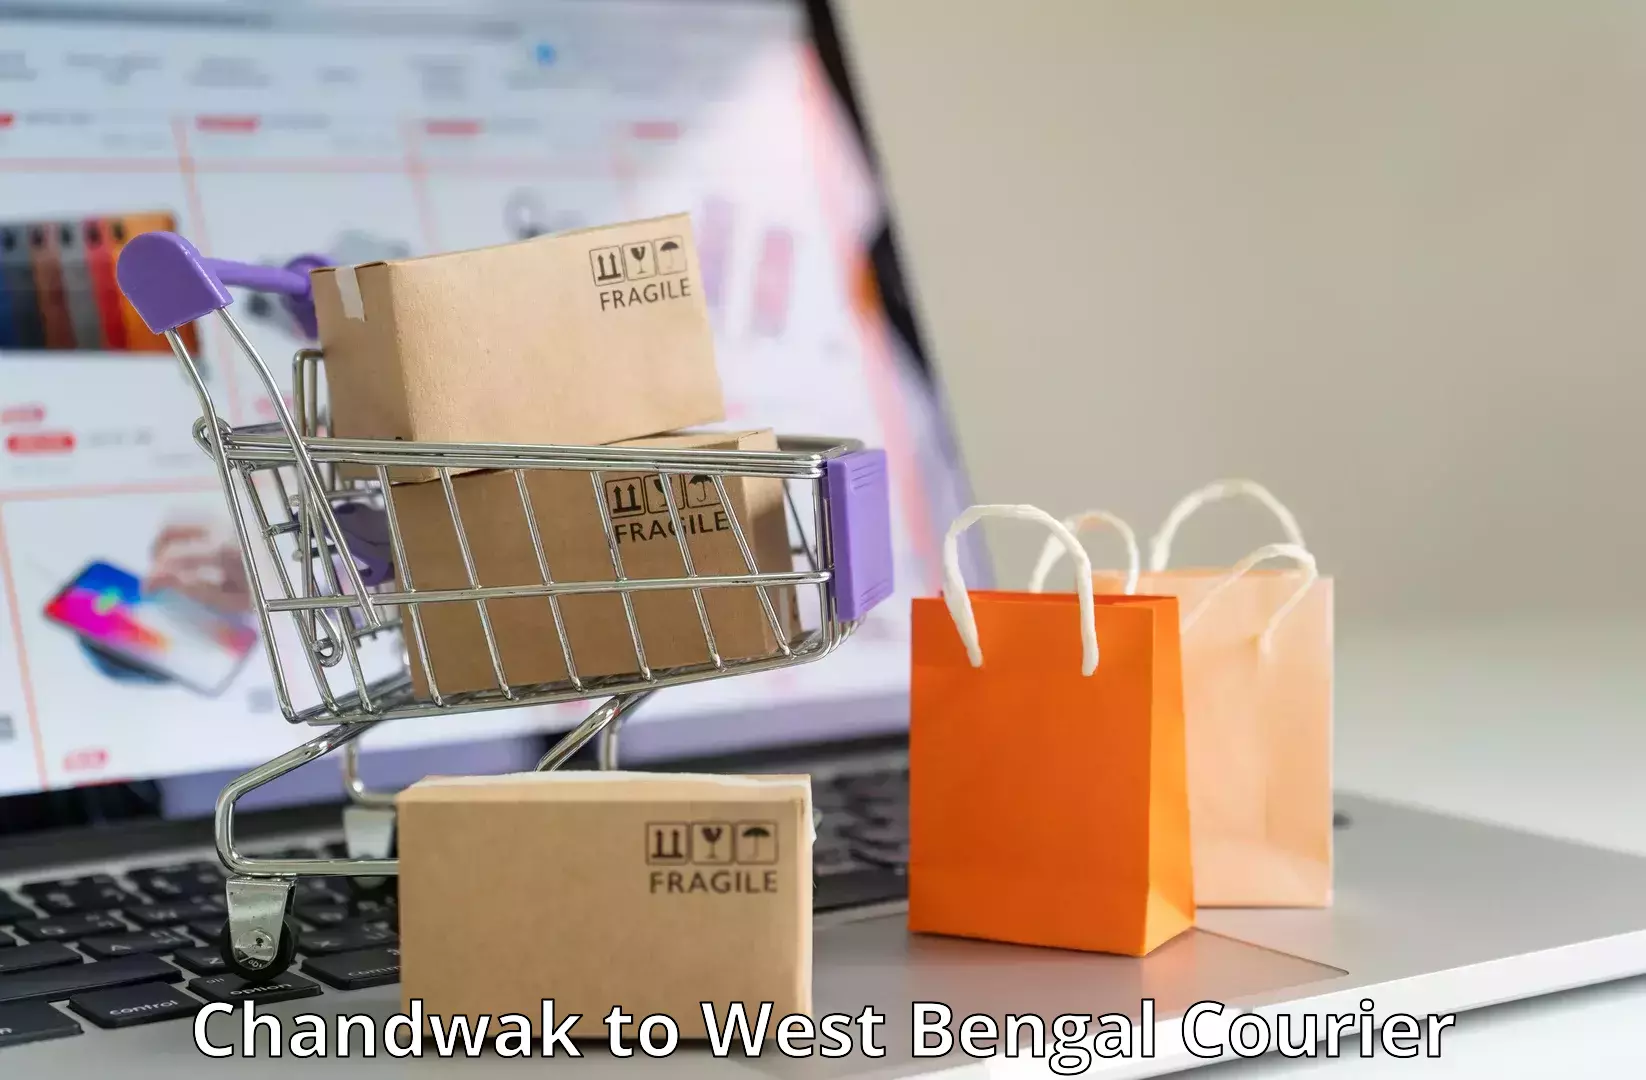 Next-day delivery options Chandwak to West Bengal